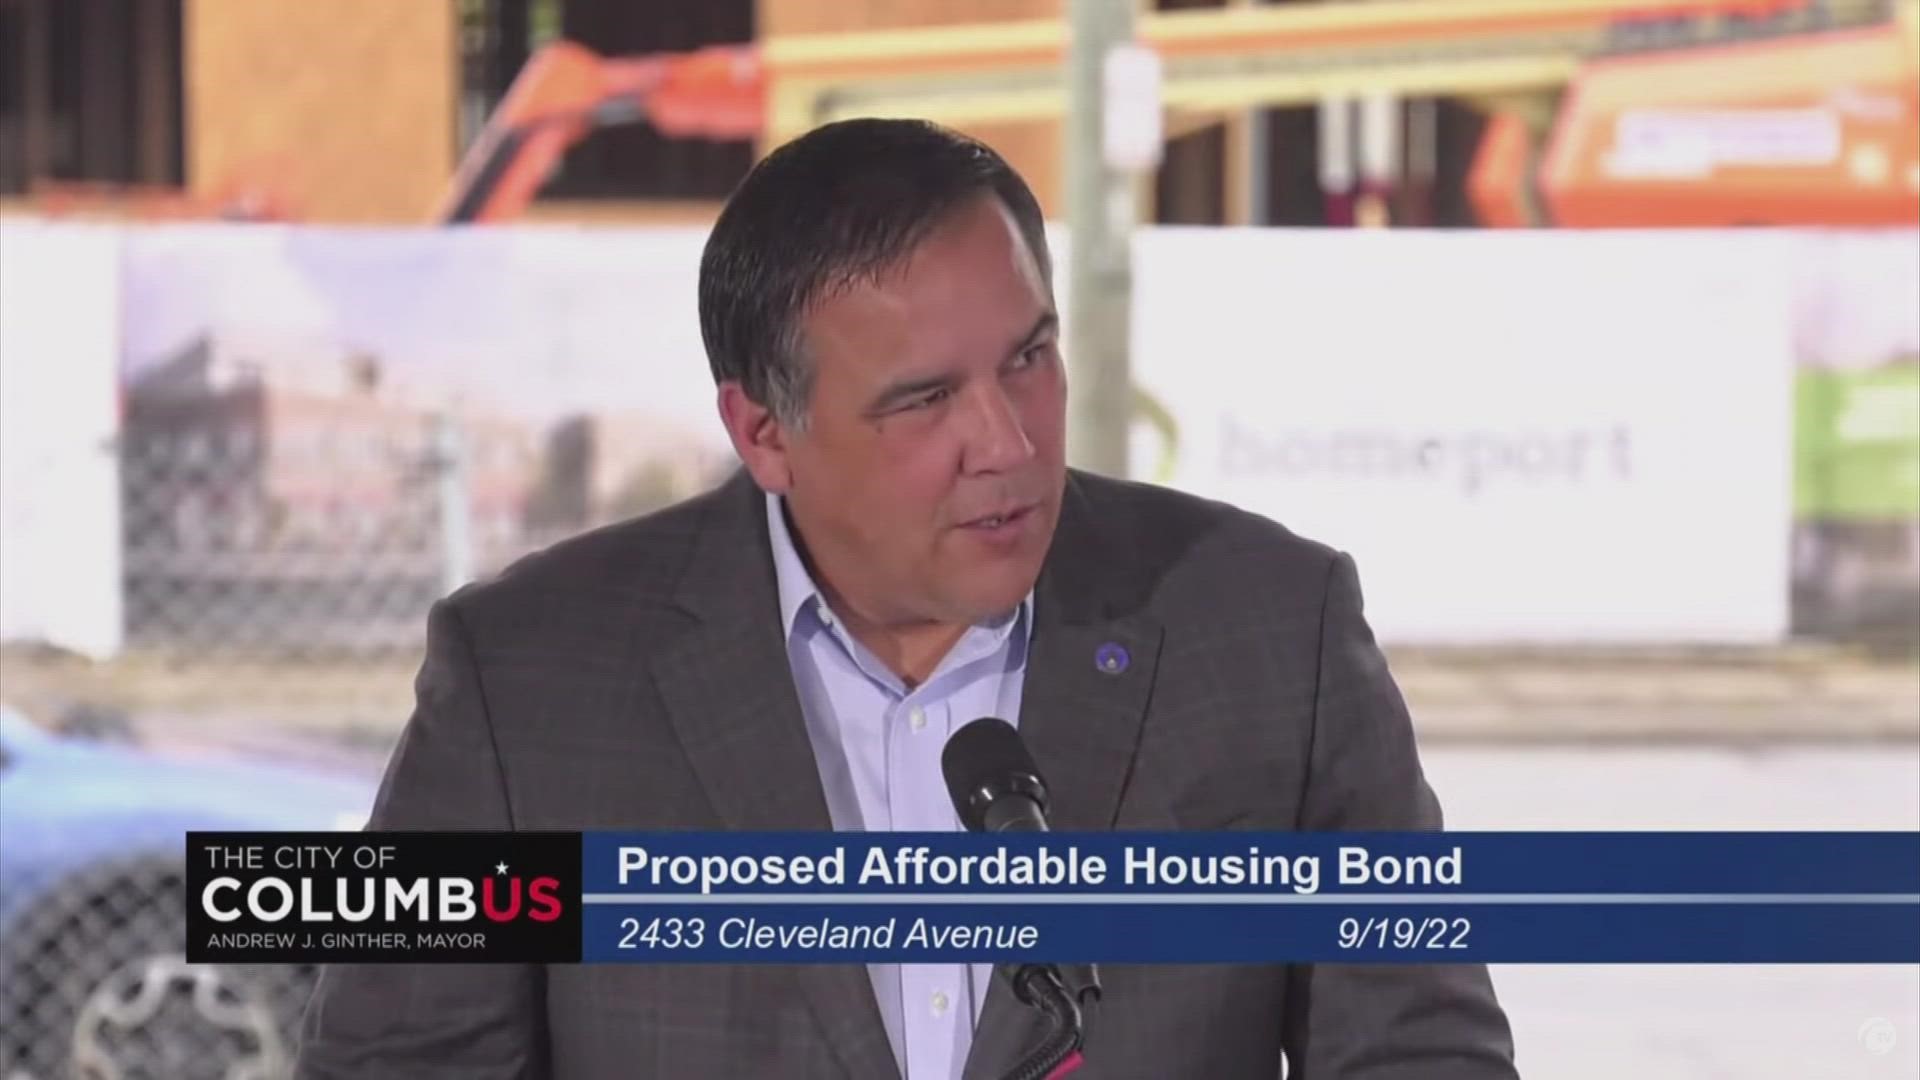 Mayor Ginther outlined how the proposed $200 million affordable housing bond – a portion of the $1.5 billion bond package – addresses Central Ohio’s housing crisis.